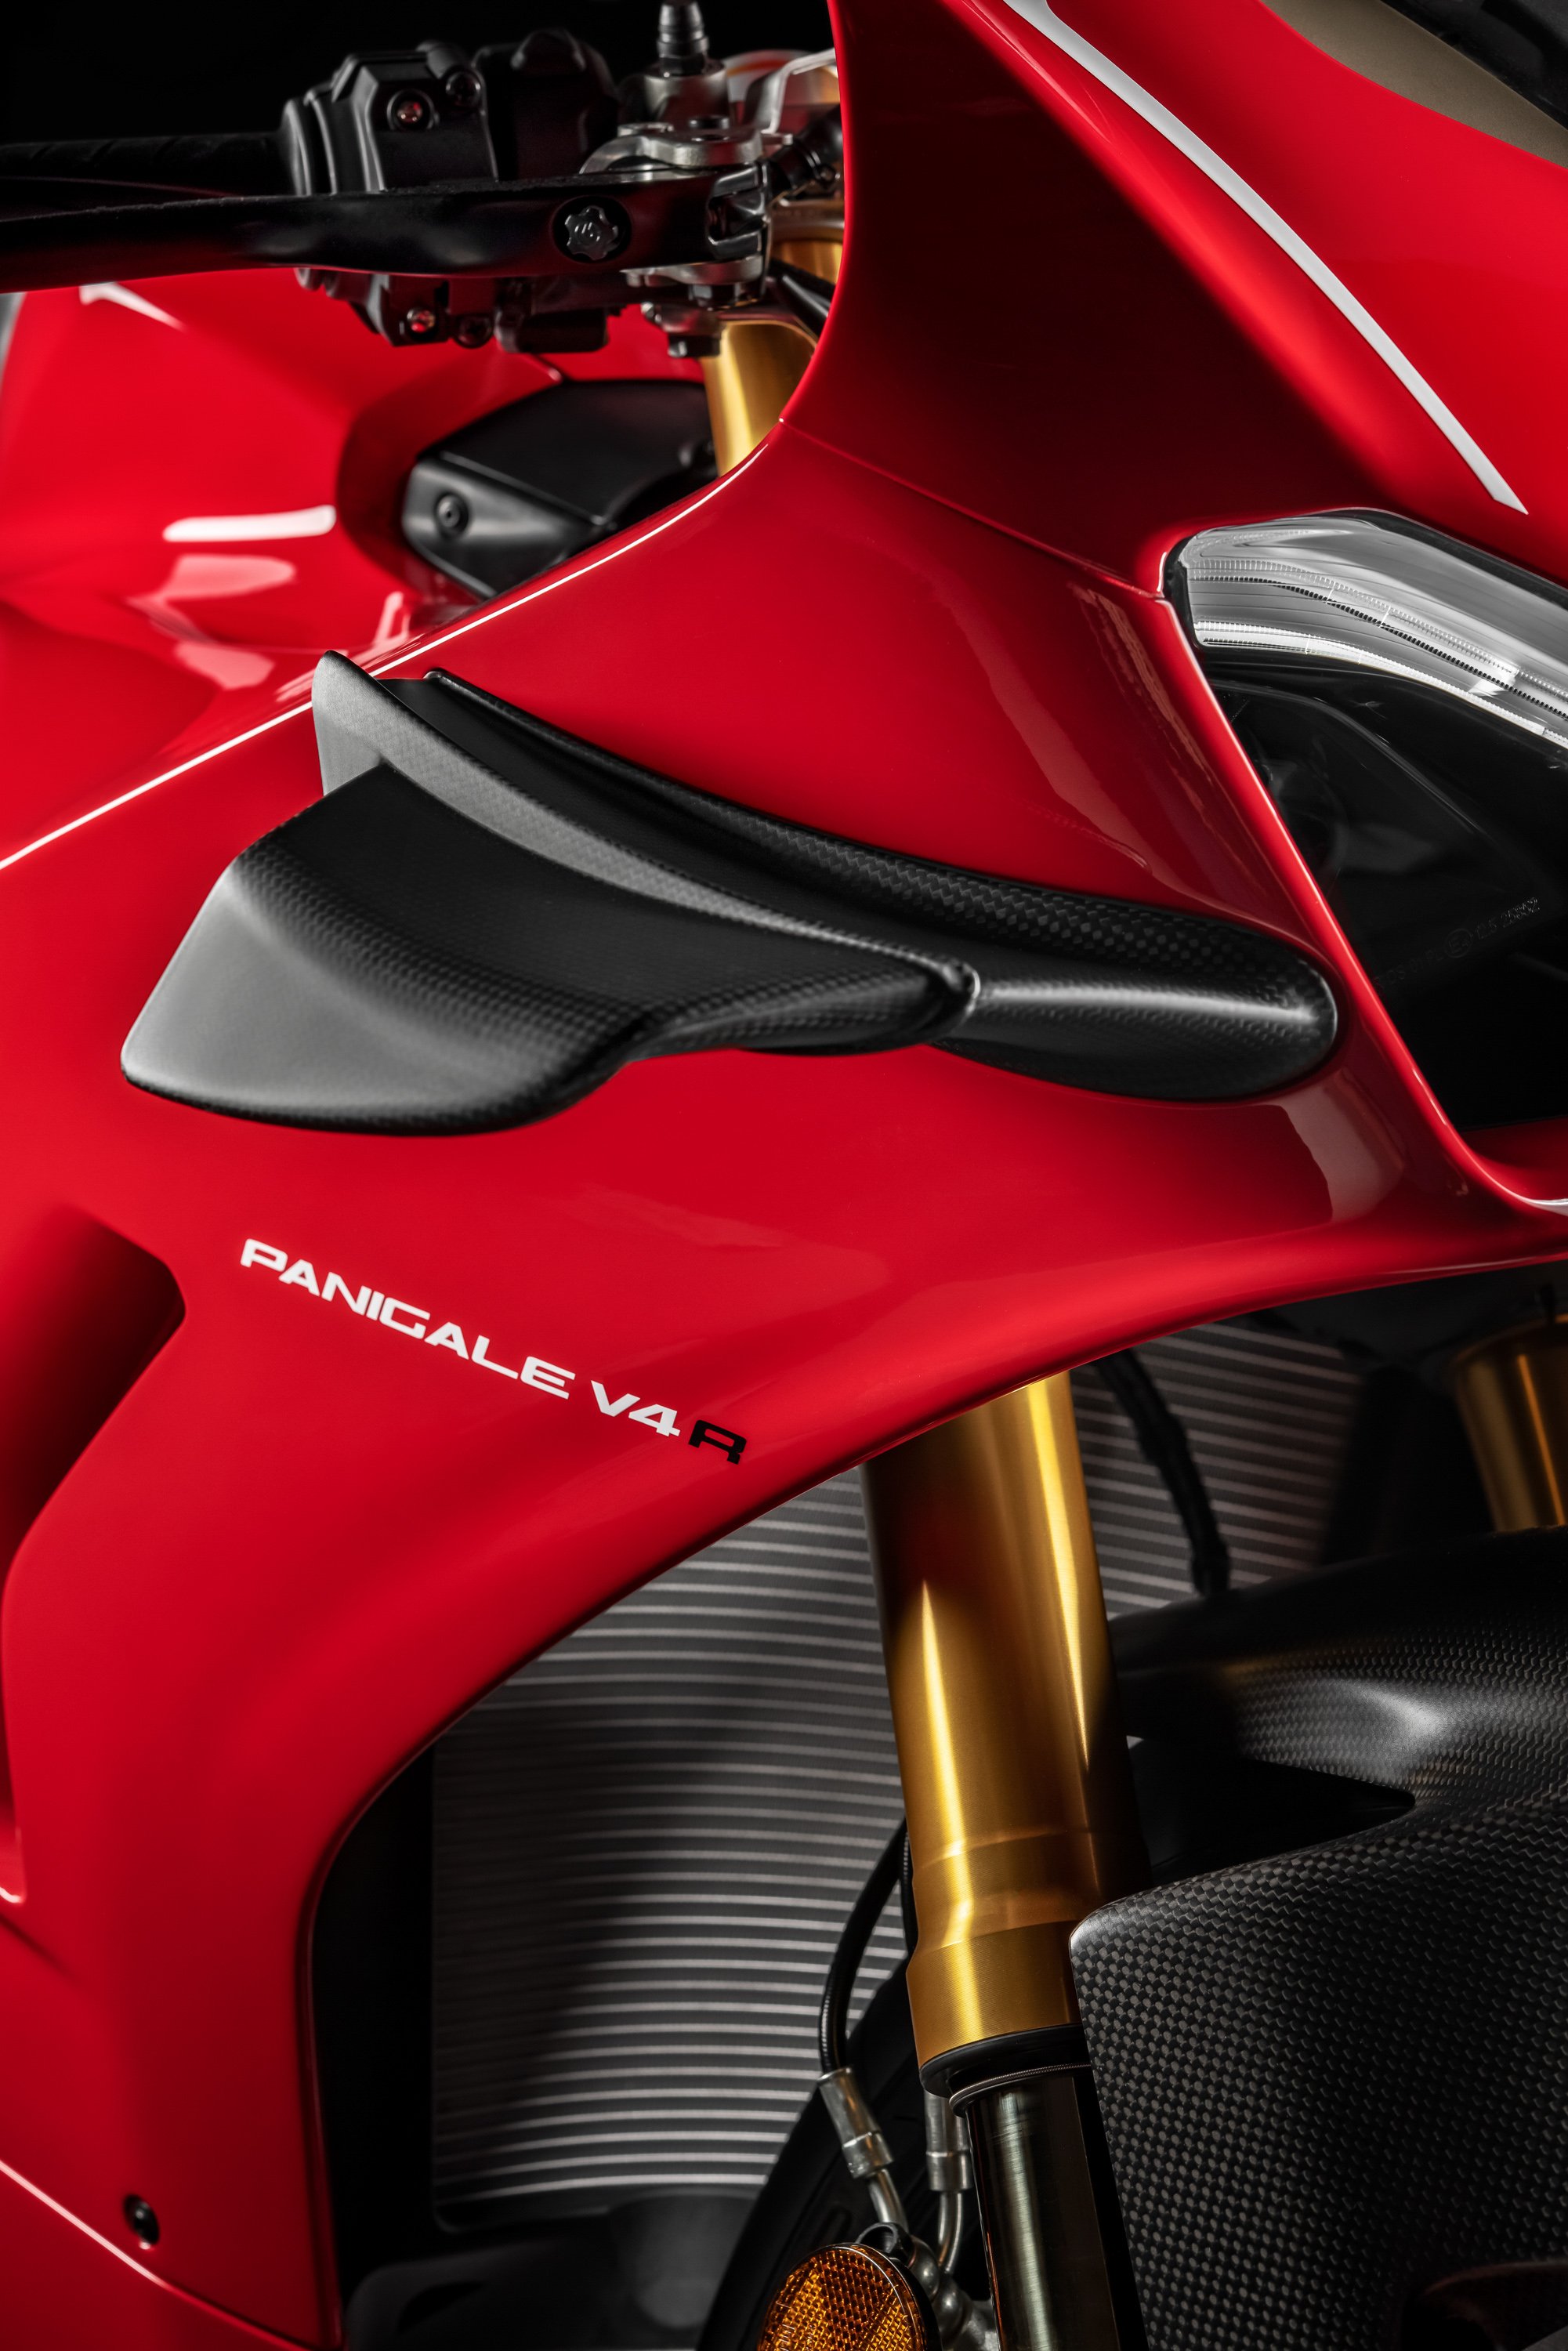 Ducati Announces Panigale V4 R Track Special Ahead of 2018 Milan